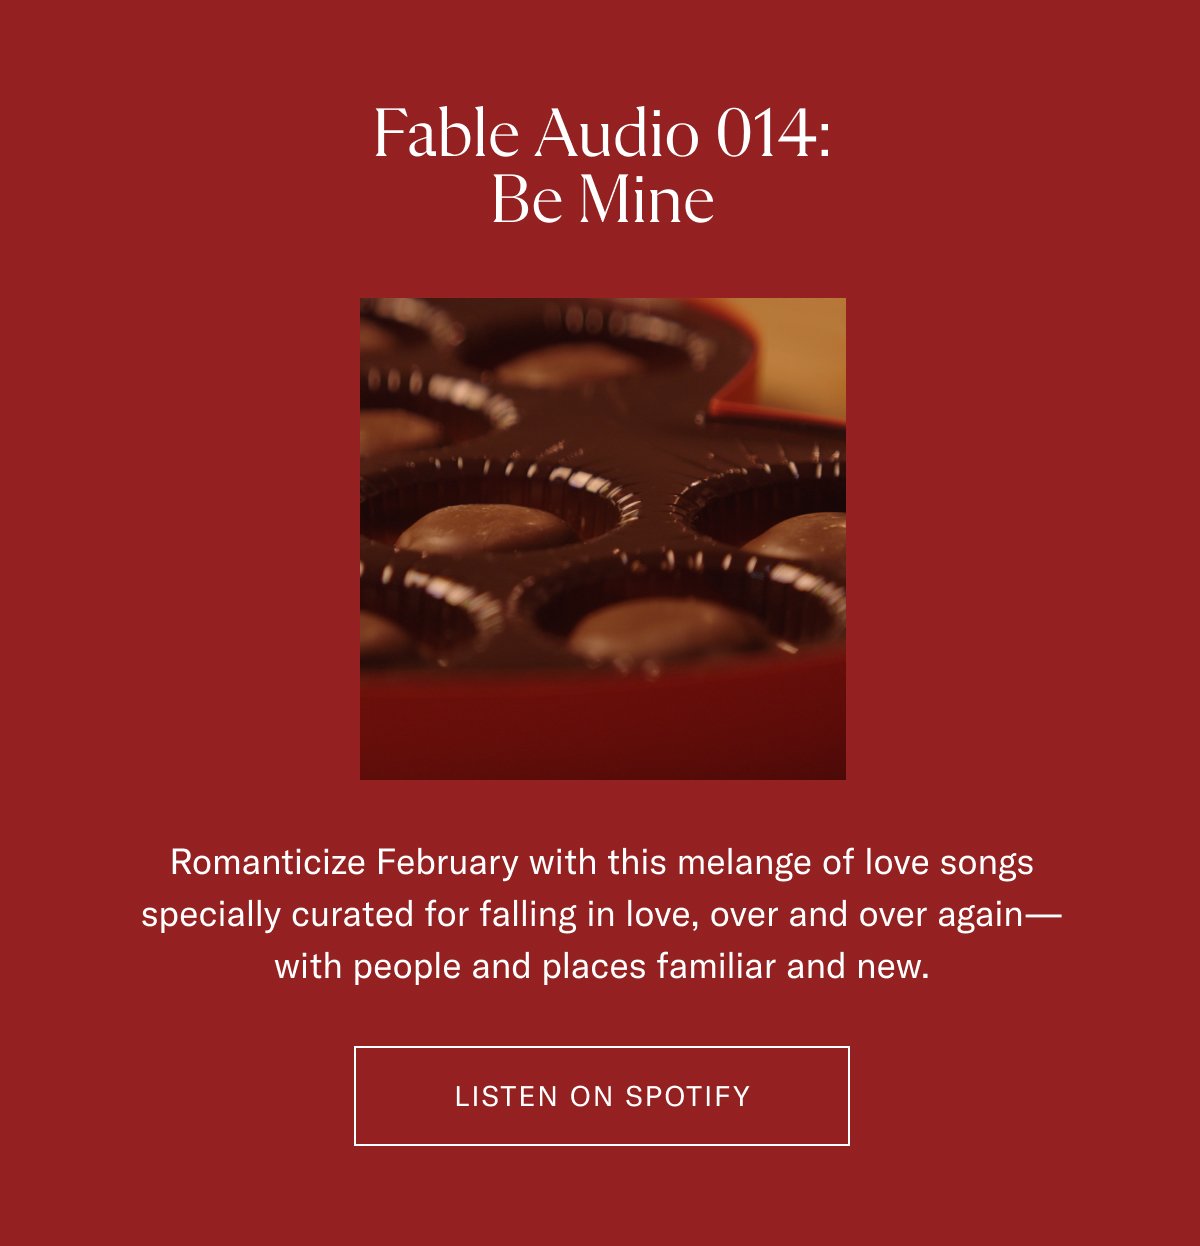 Fable Audio 014: Be Mine